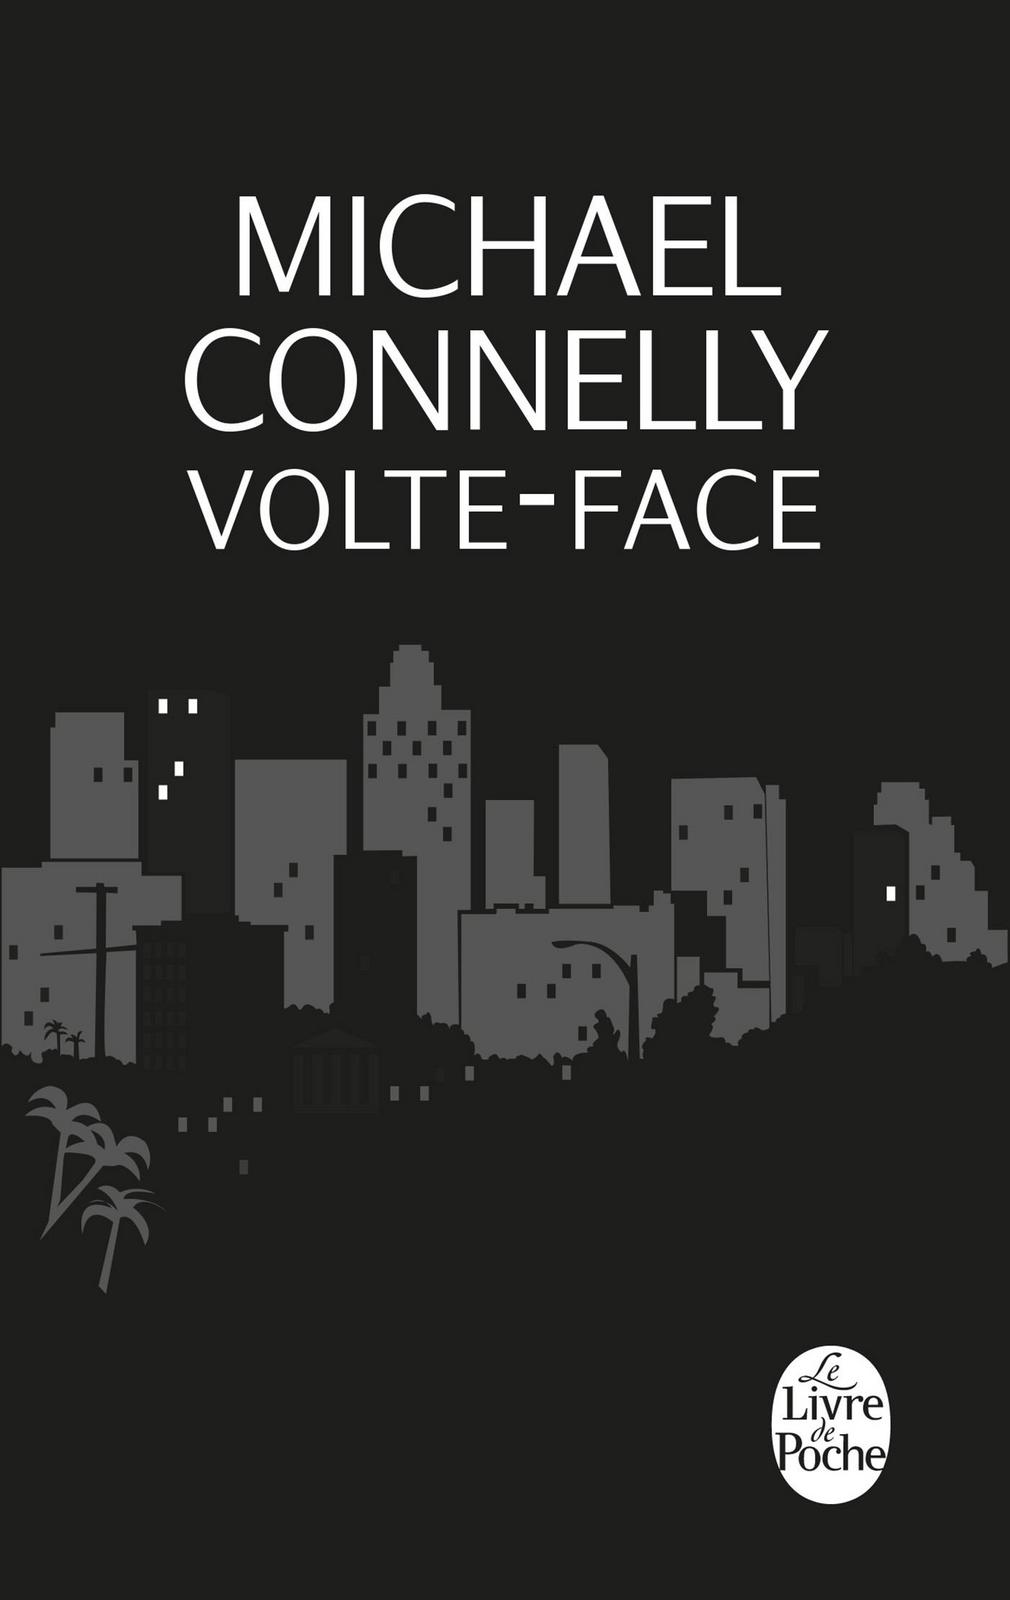 Michael Connelly: Volte-face (French language, 2013)